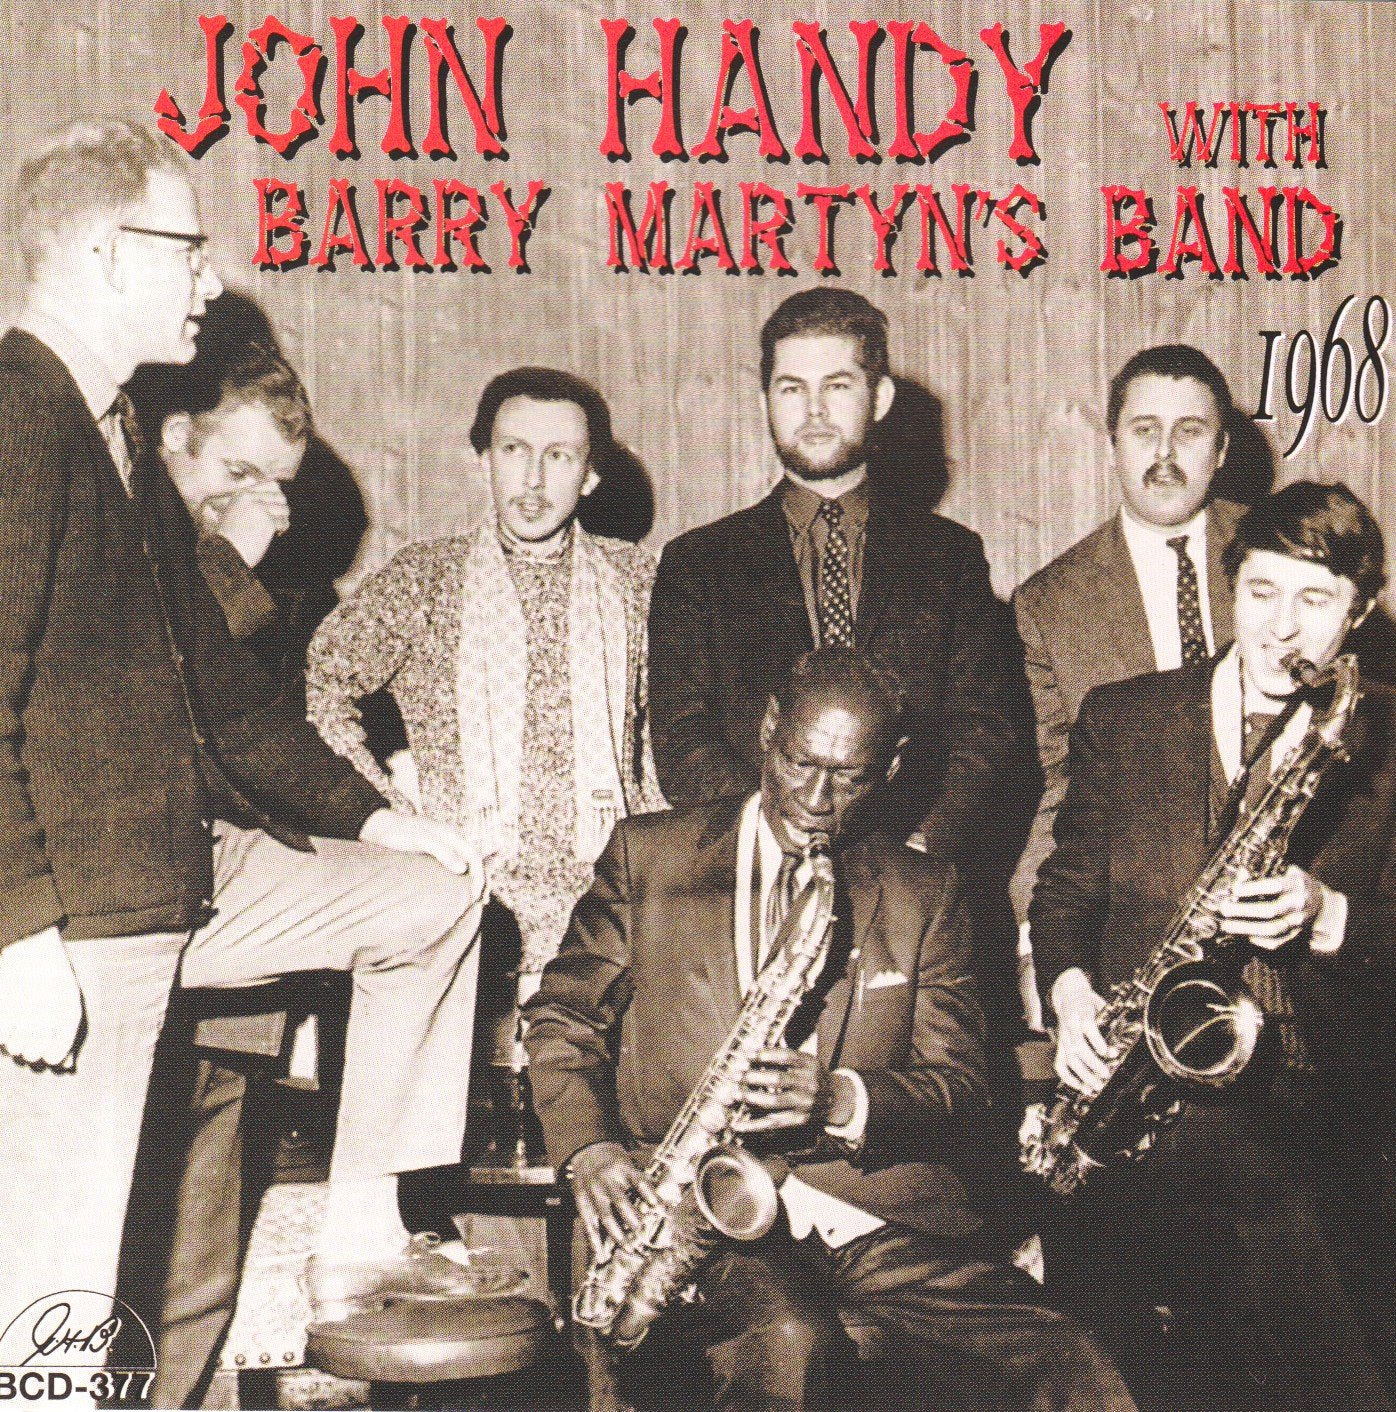 With Barry Martyn's Band